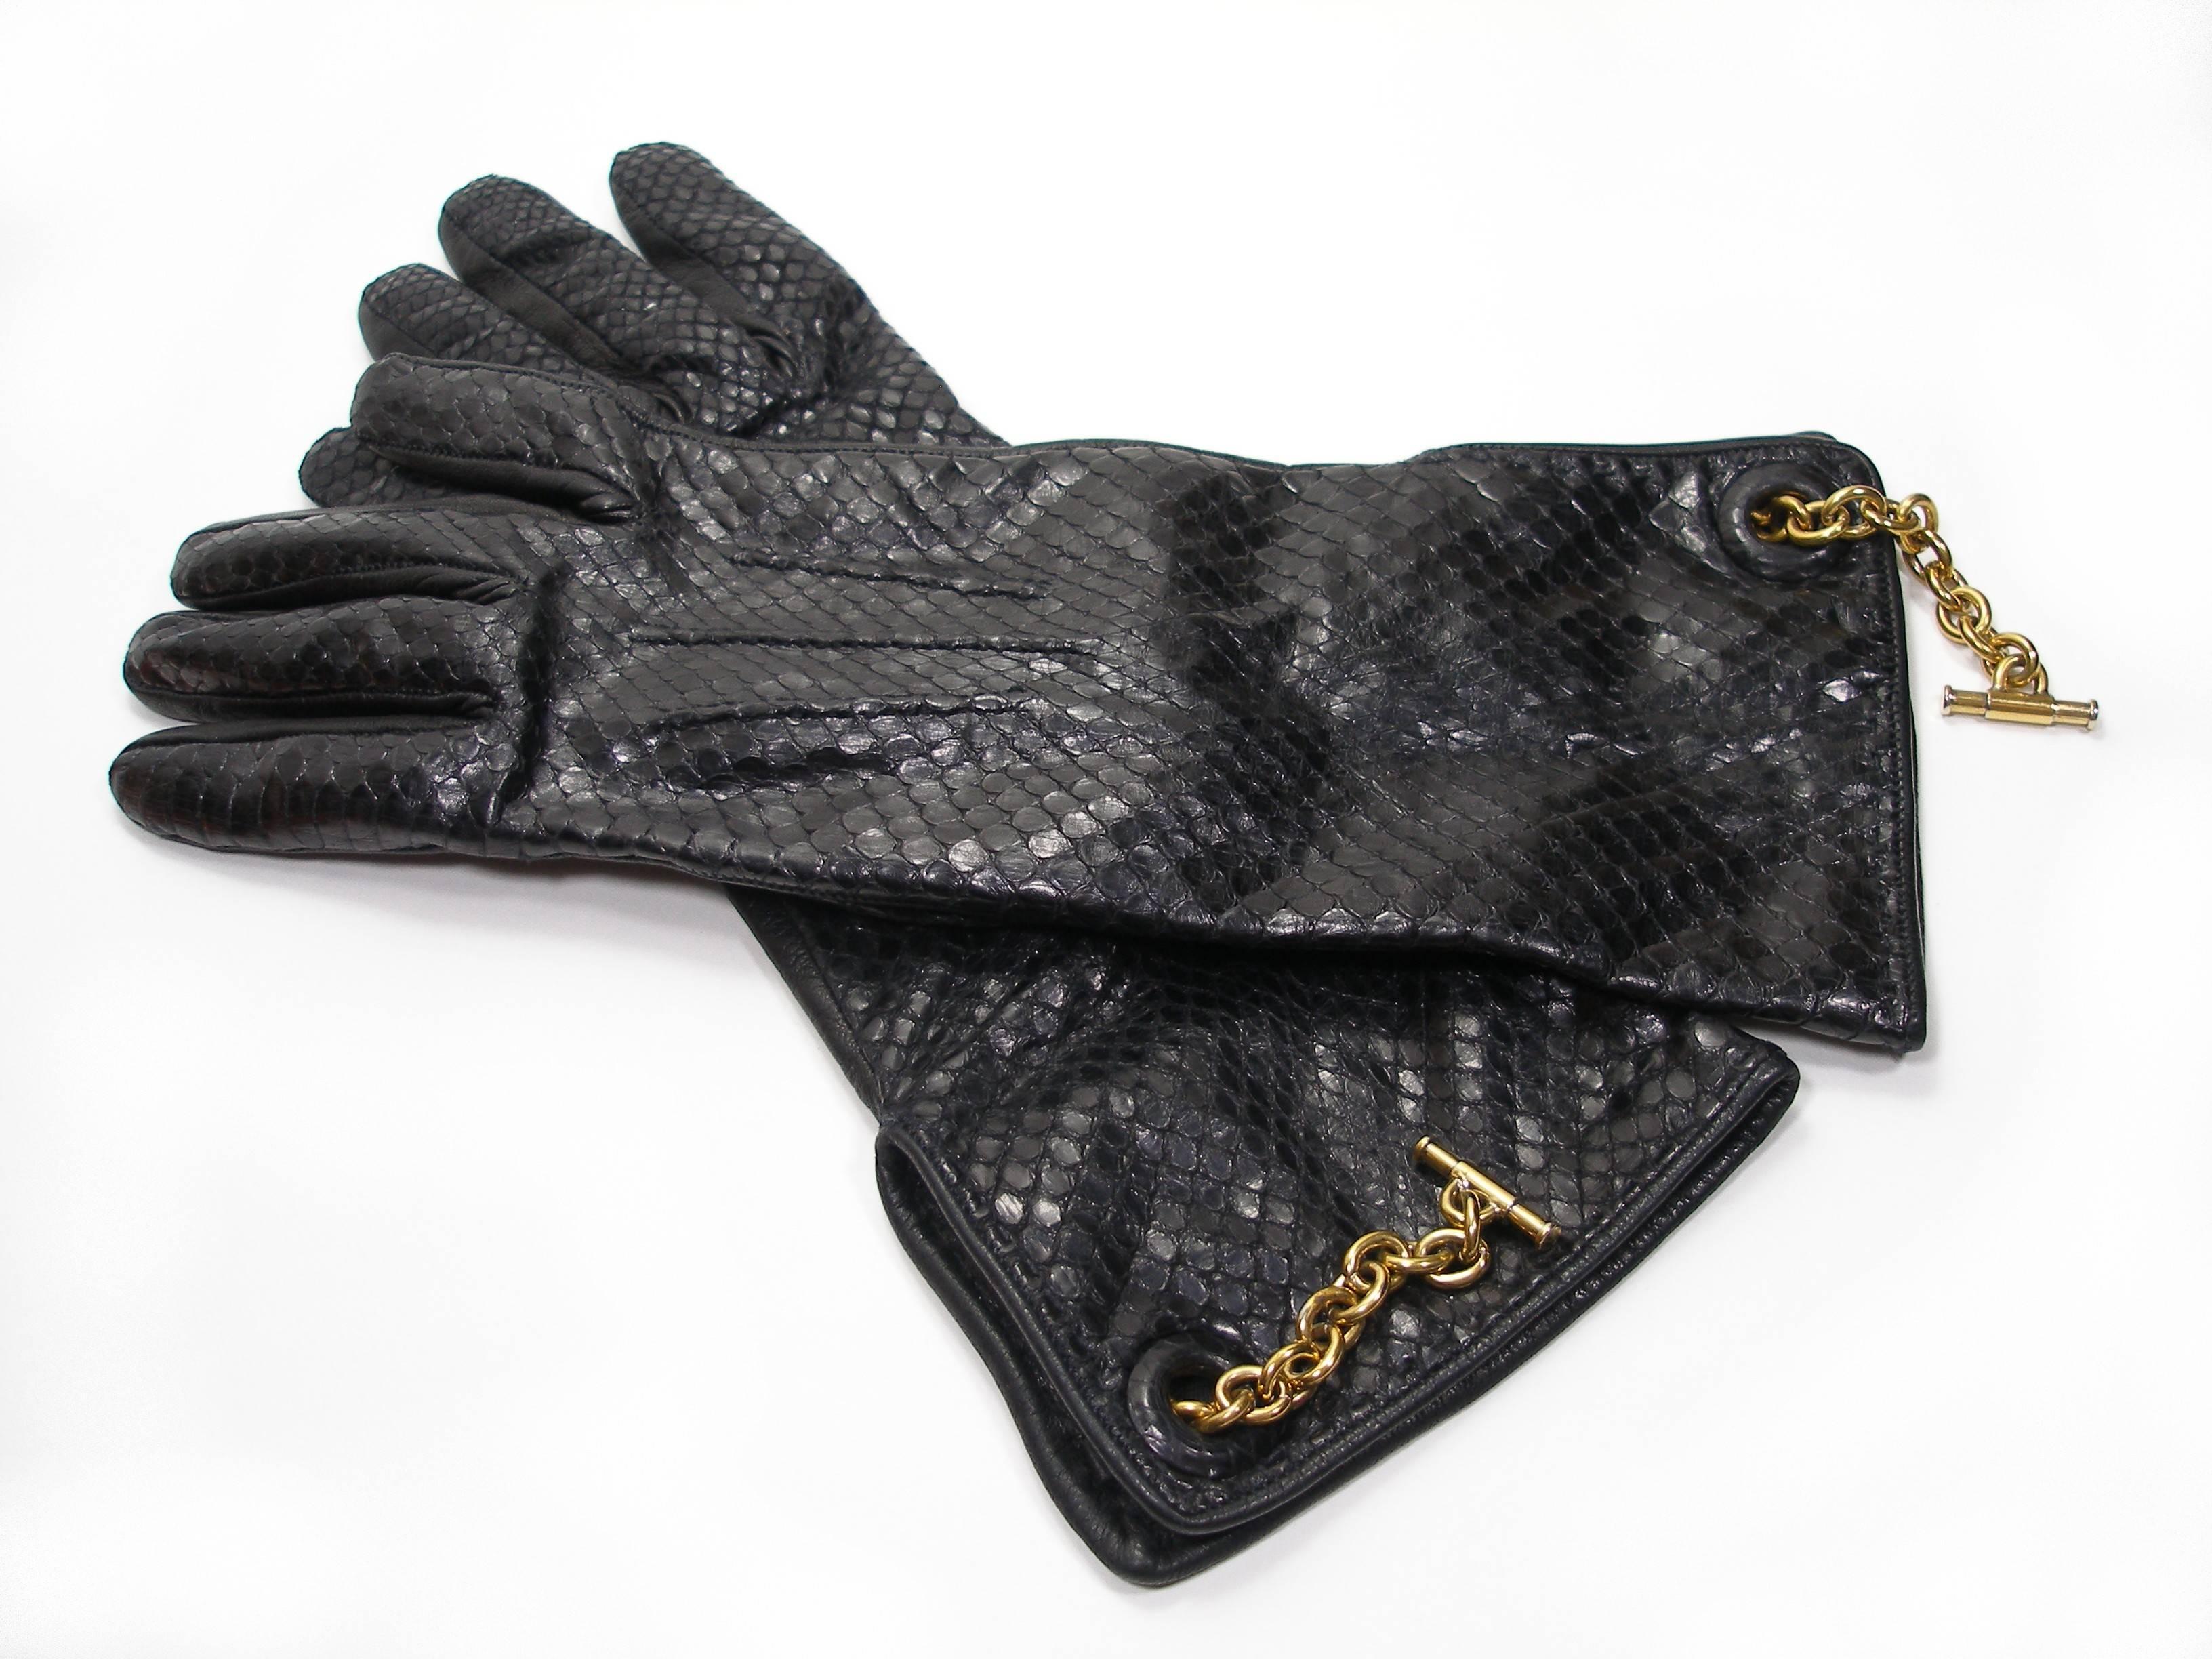 Stunning YSL Python Gloves
Size 6 FR / 
and gold hardware 
Rare in the second hand Luxury market
This pair of gloves is like new 
Included customs fees and vat
Thank you for visiting my shop !